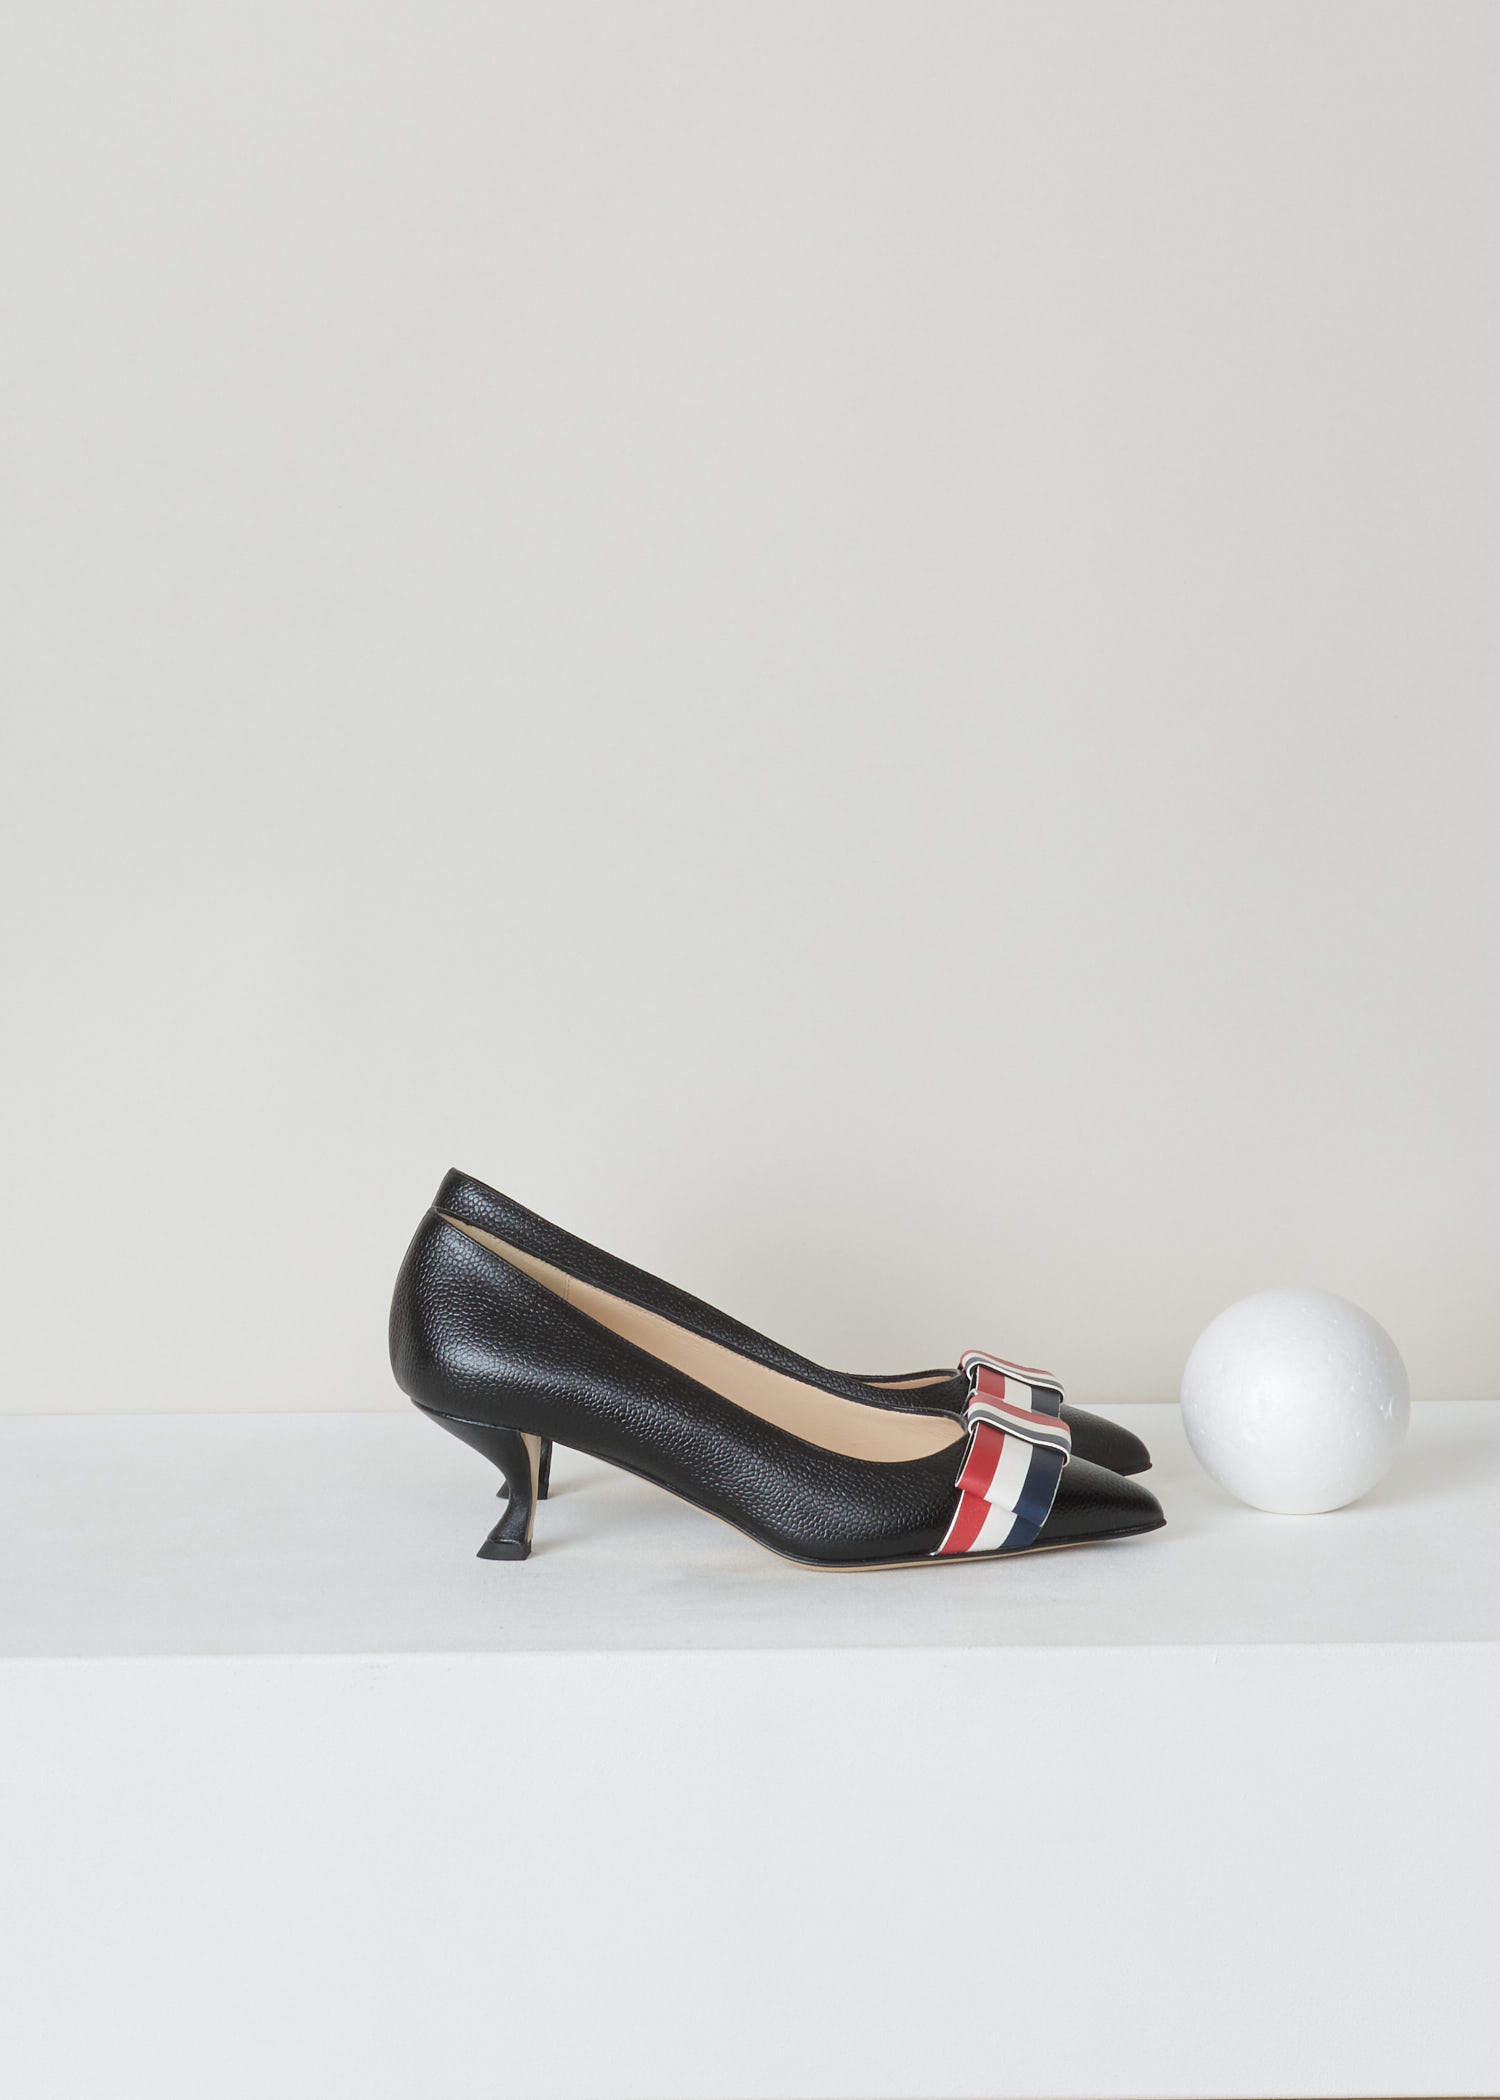 Thom Browne, Curved queenie heel pump, FFH121A_03542_001_black, black, side, High quality leather tooled until it got this beautiful pebble grain motive. As most of the Thom Browne items this gorgeous queenie heels pump also comes with the infamous rwb colours in the shape of a bow on the vamp of the shoe.   

heel height: 5 cm / 2 inch. 